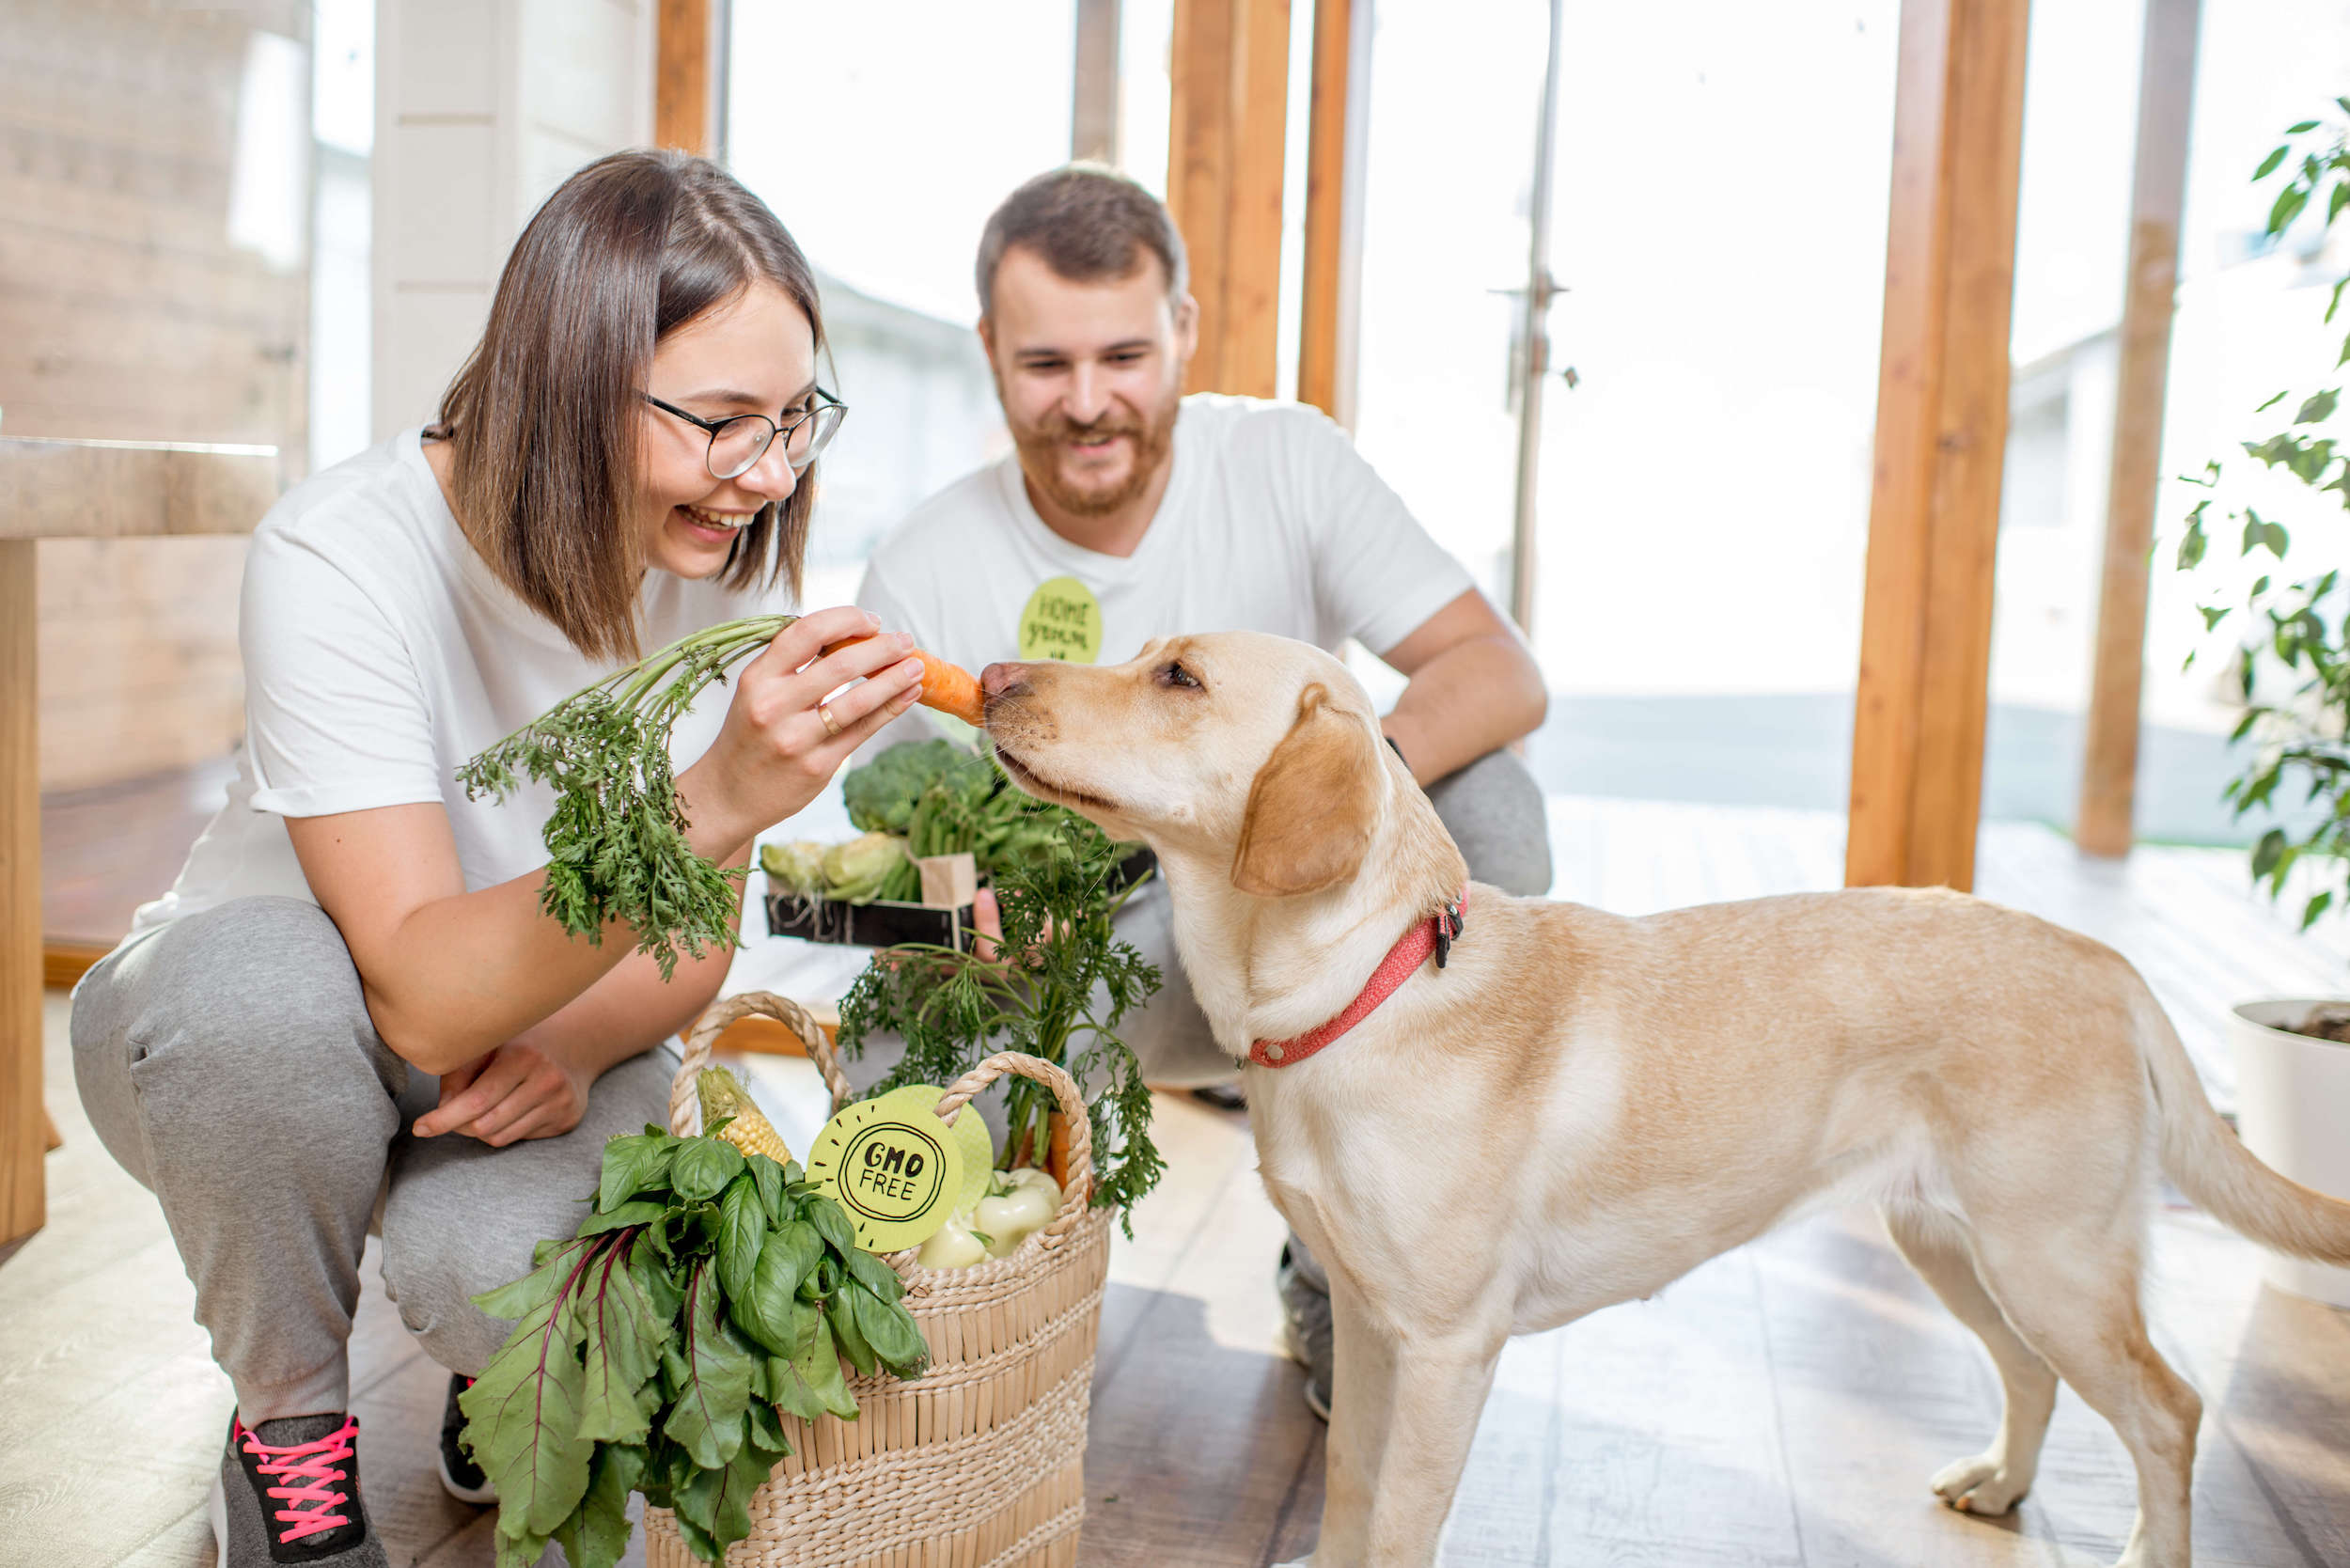 Summer Fruit and Vegetables Your Dog Can Eat